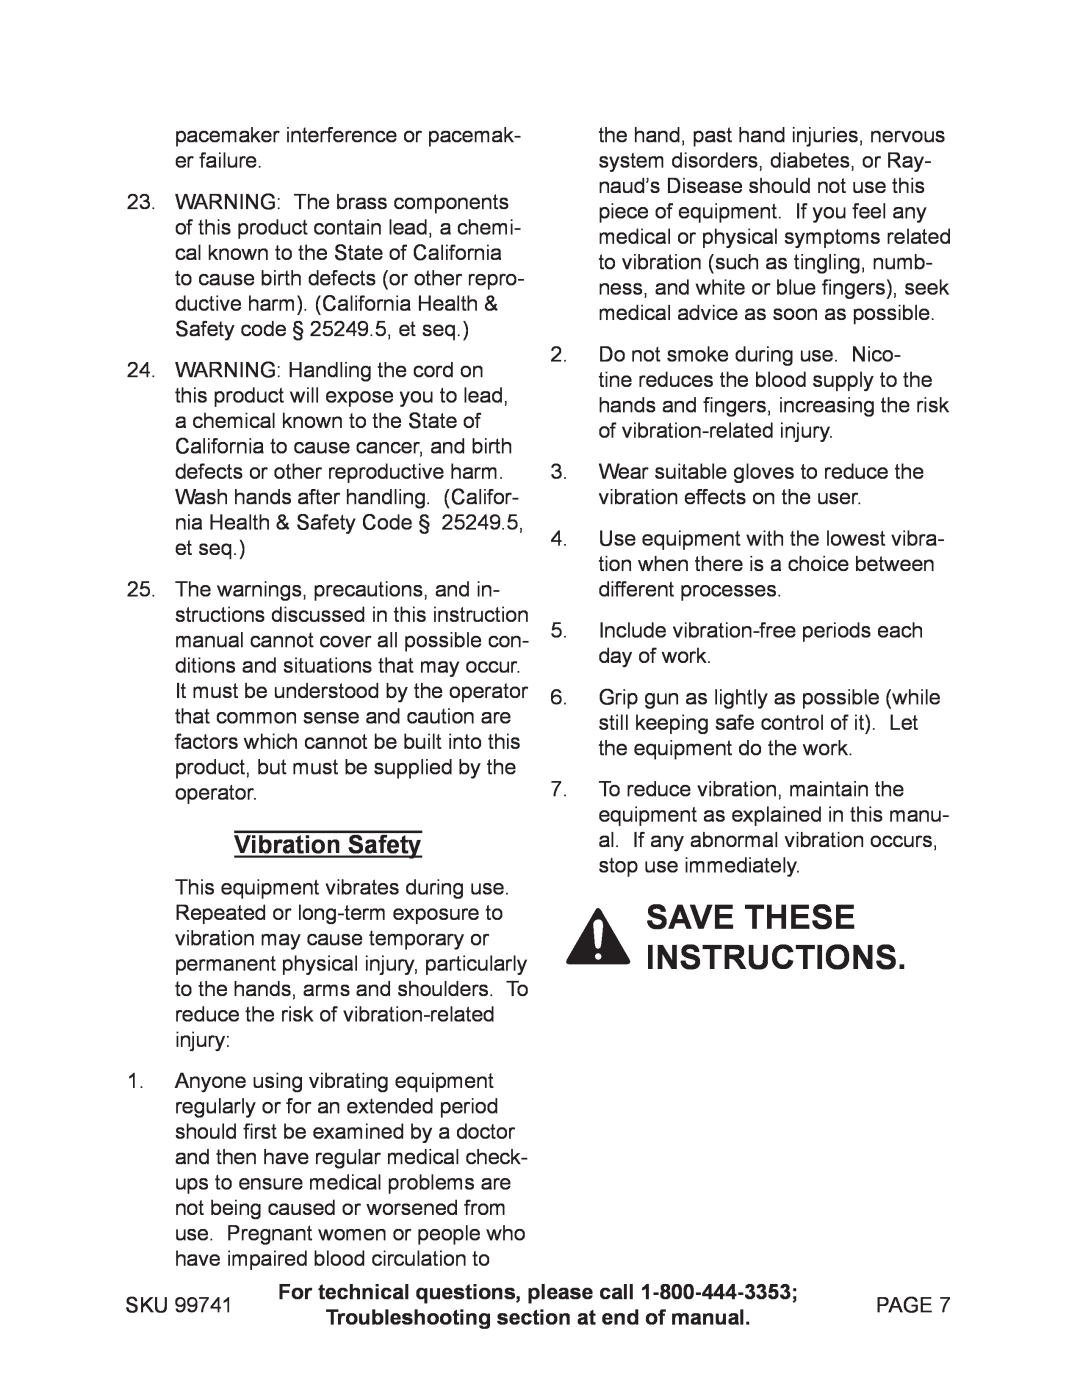 Harbor Freight Tools 99741 manual Save these instructions, Vibration Safety 